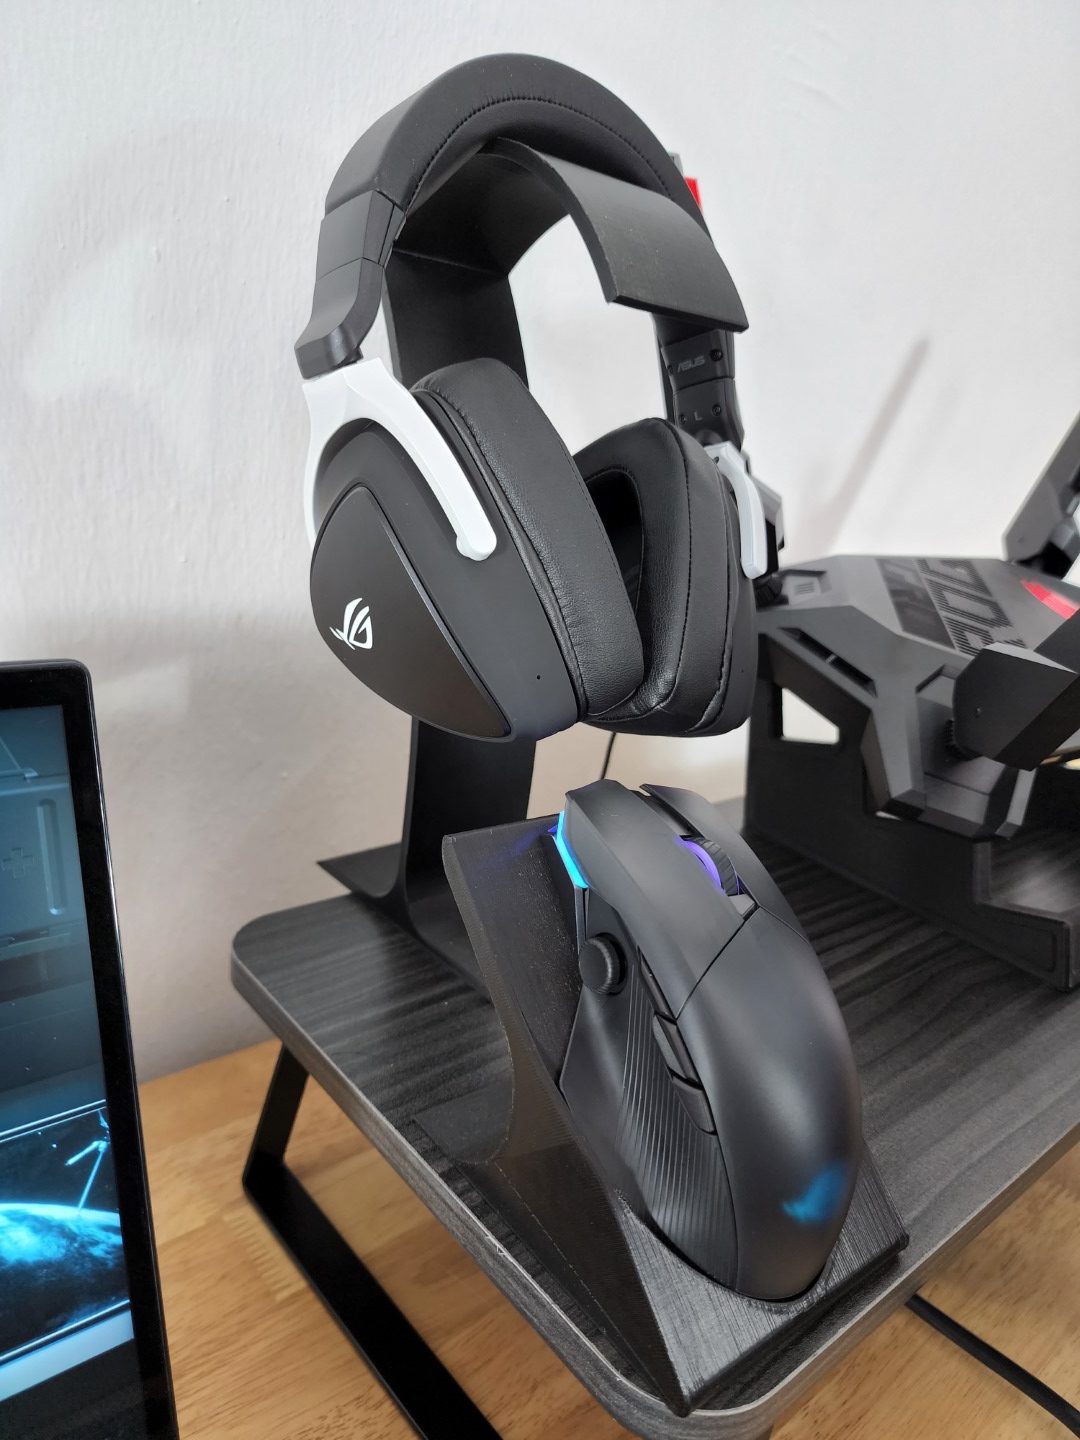 Review: ASUS ROG Delta S Wireless Gaming Headset